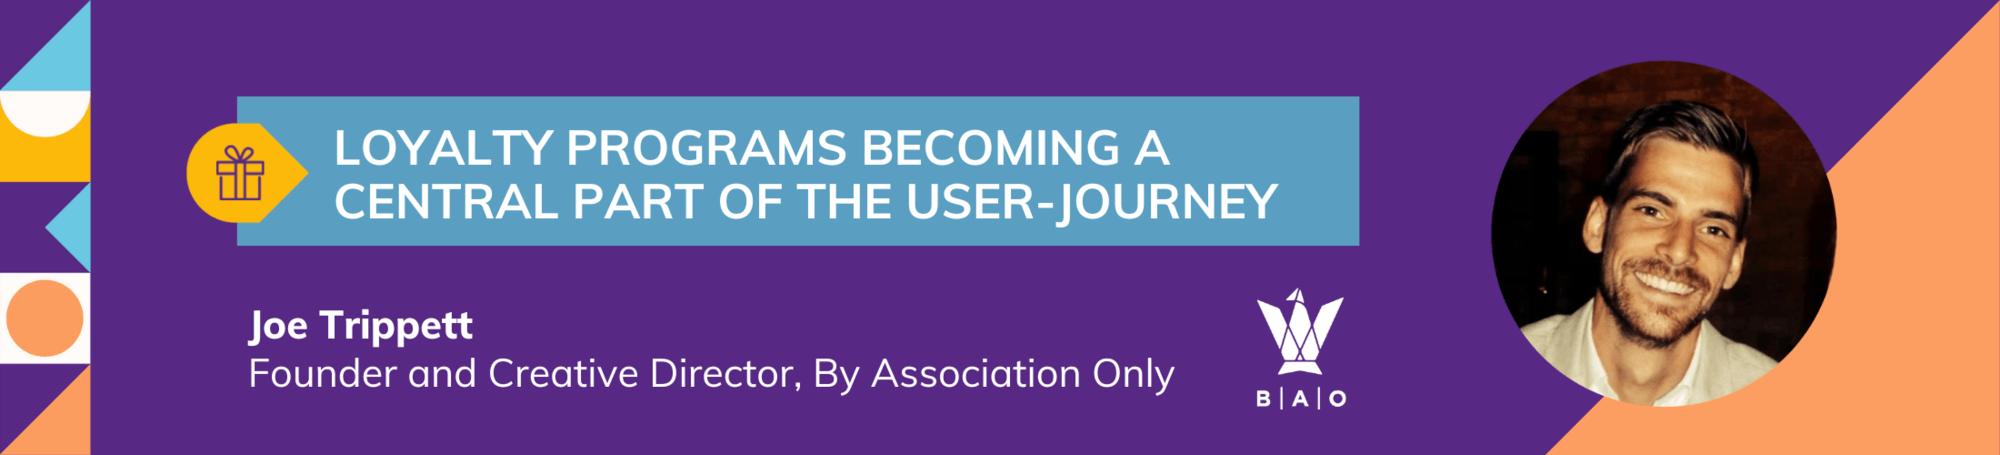 Loyalty programs becoming a central part of the user-journey 